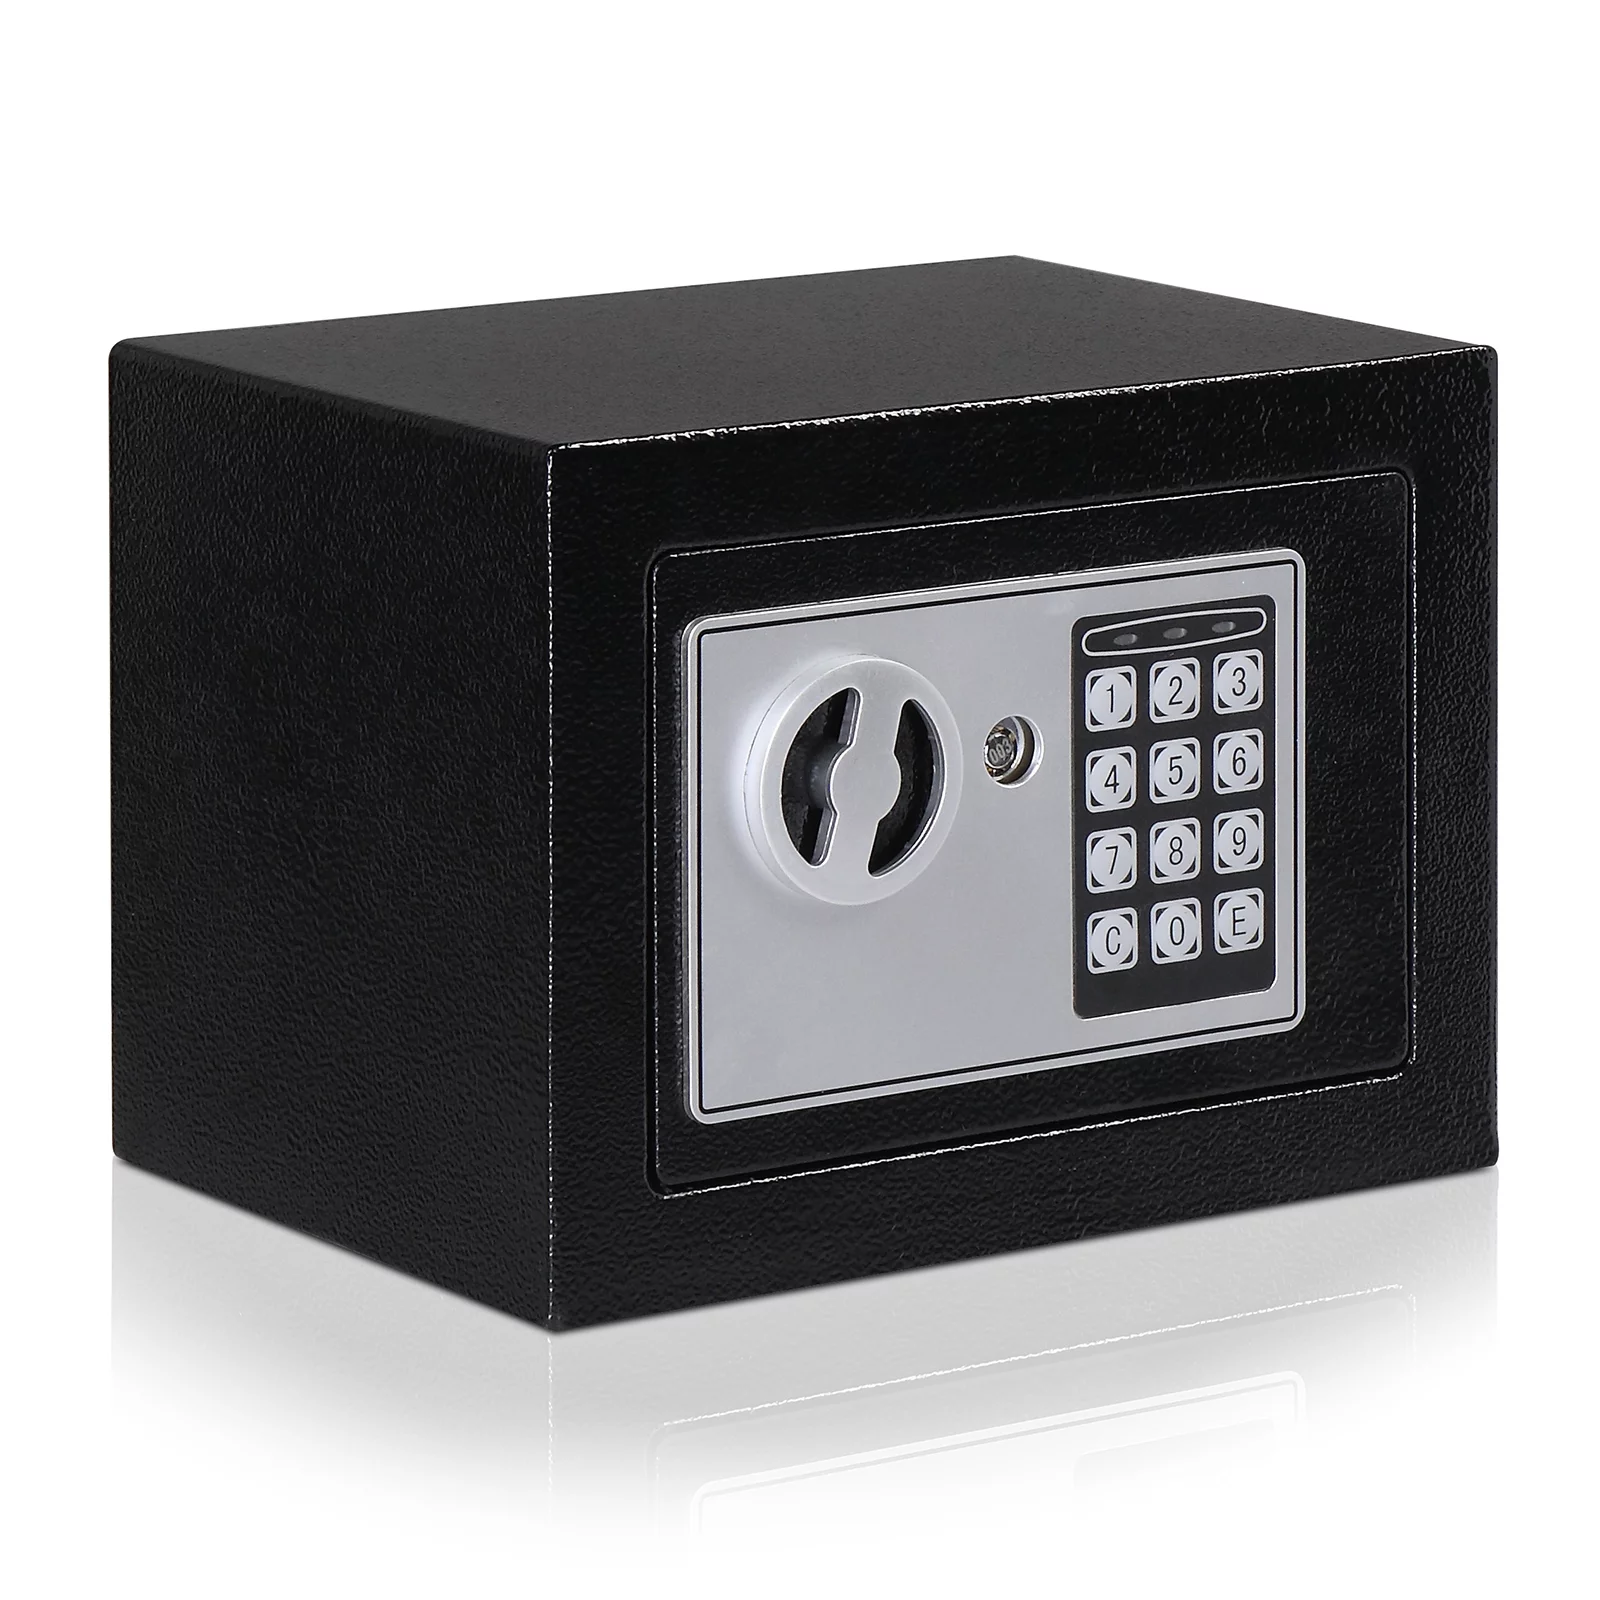 Ktaxon 0.17 Cubic feet Safe Box, Electronic Security Lock Box Safes, for Home Office Hotel